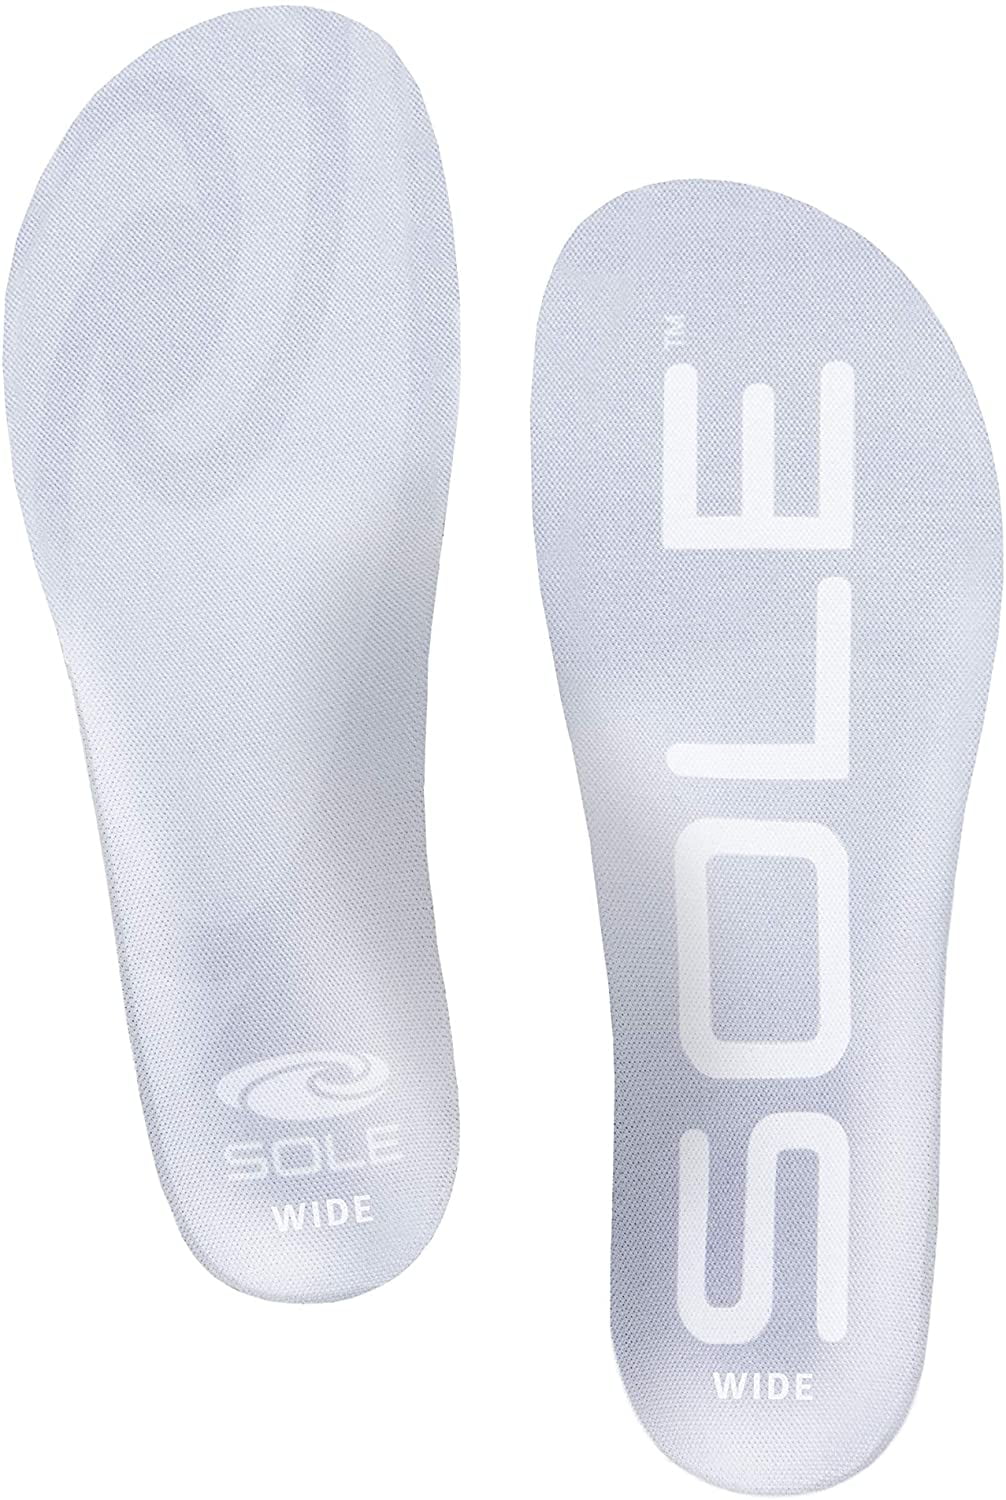 SOLE Active Thin Wide Shoe Insoles 